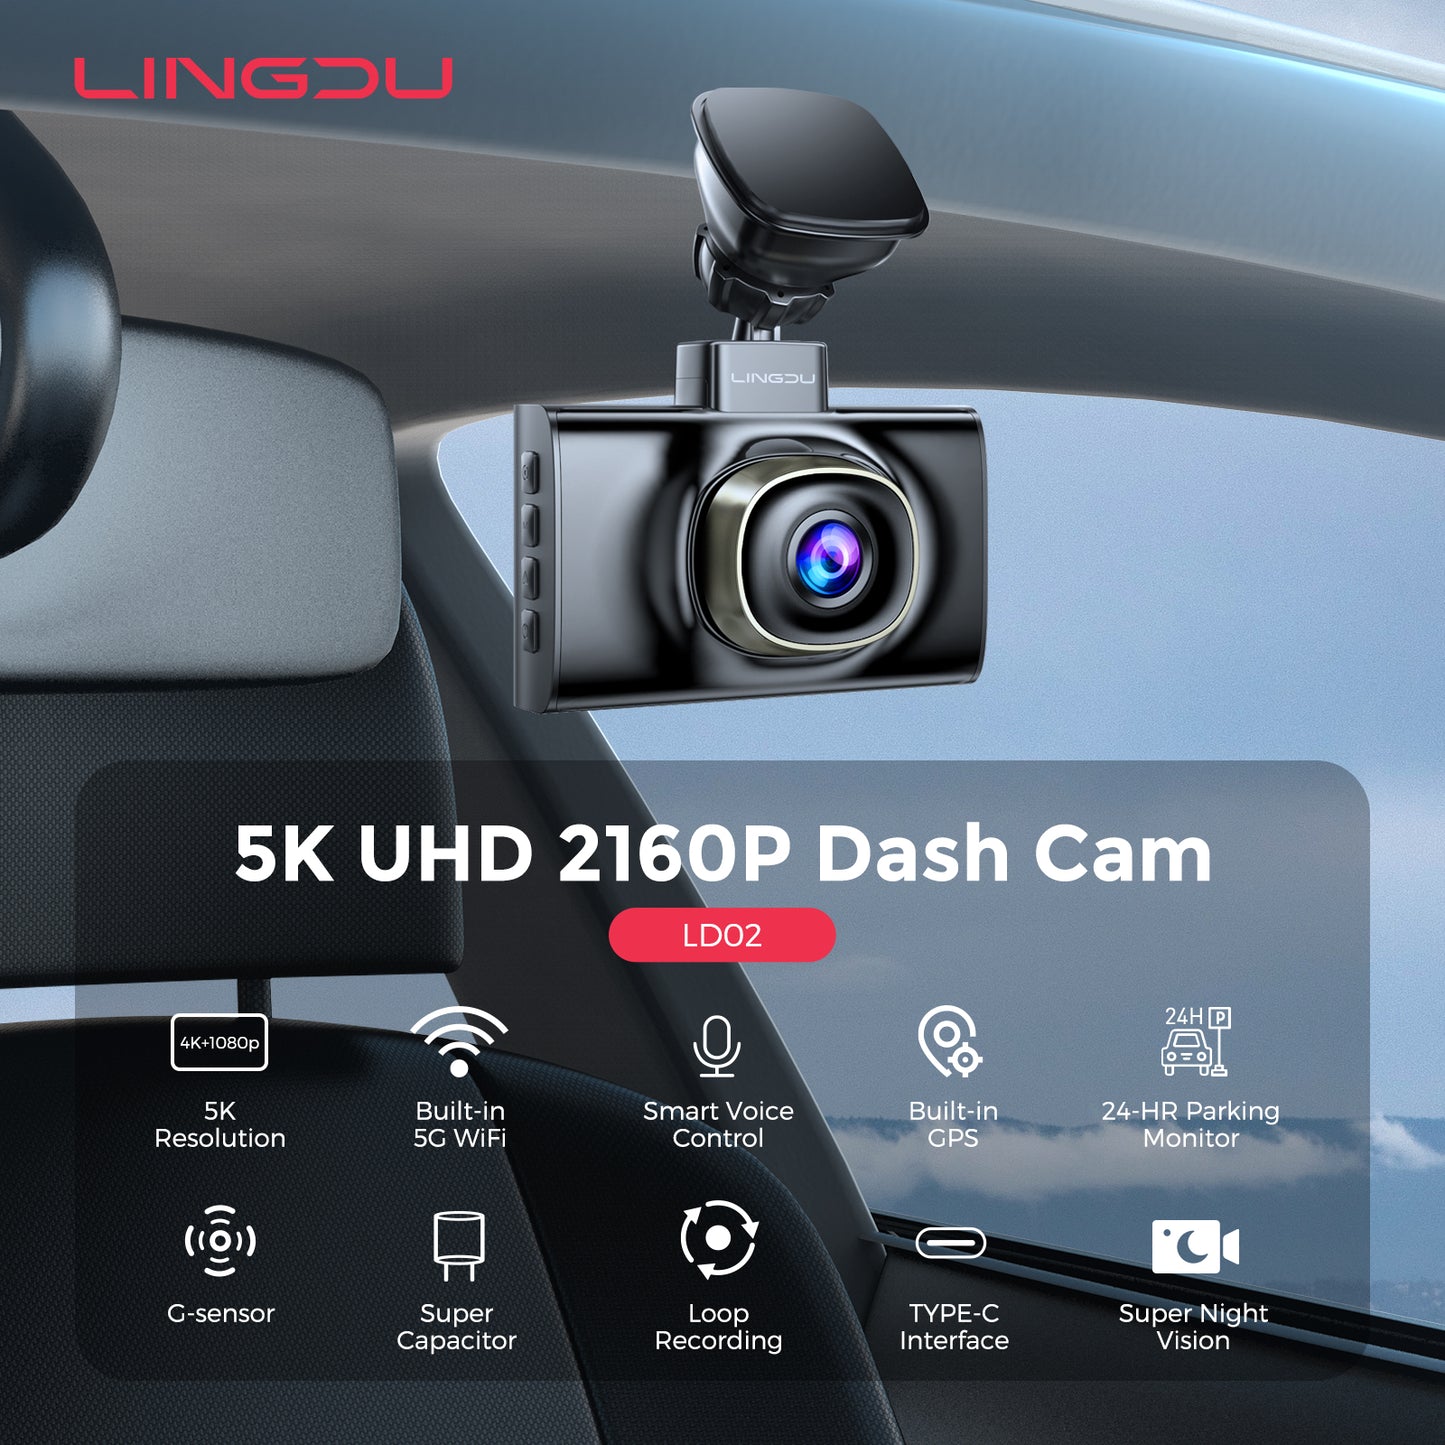 LINGDU LD02 Mirror Dash Cam - The 5K Dual-Channel Car Camera with Night Vision and 24H Parking Mode